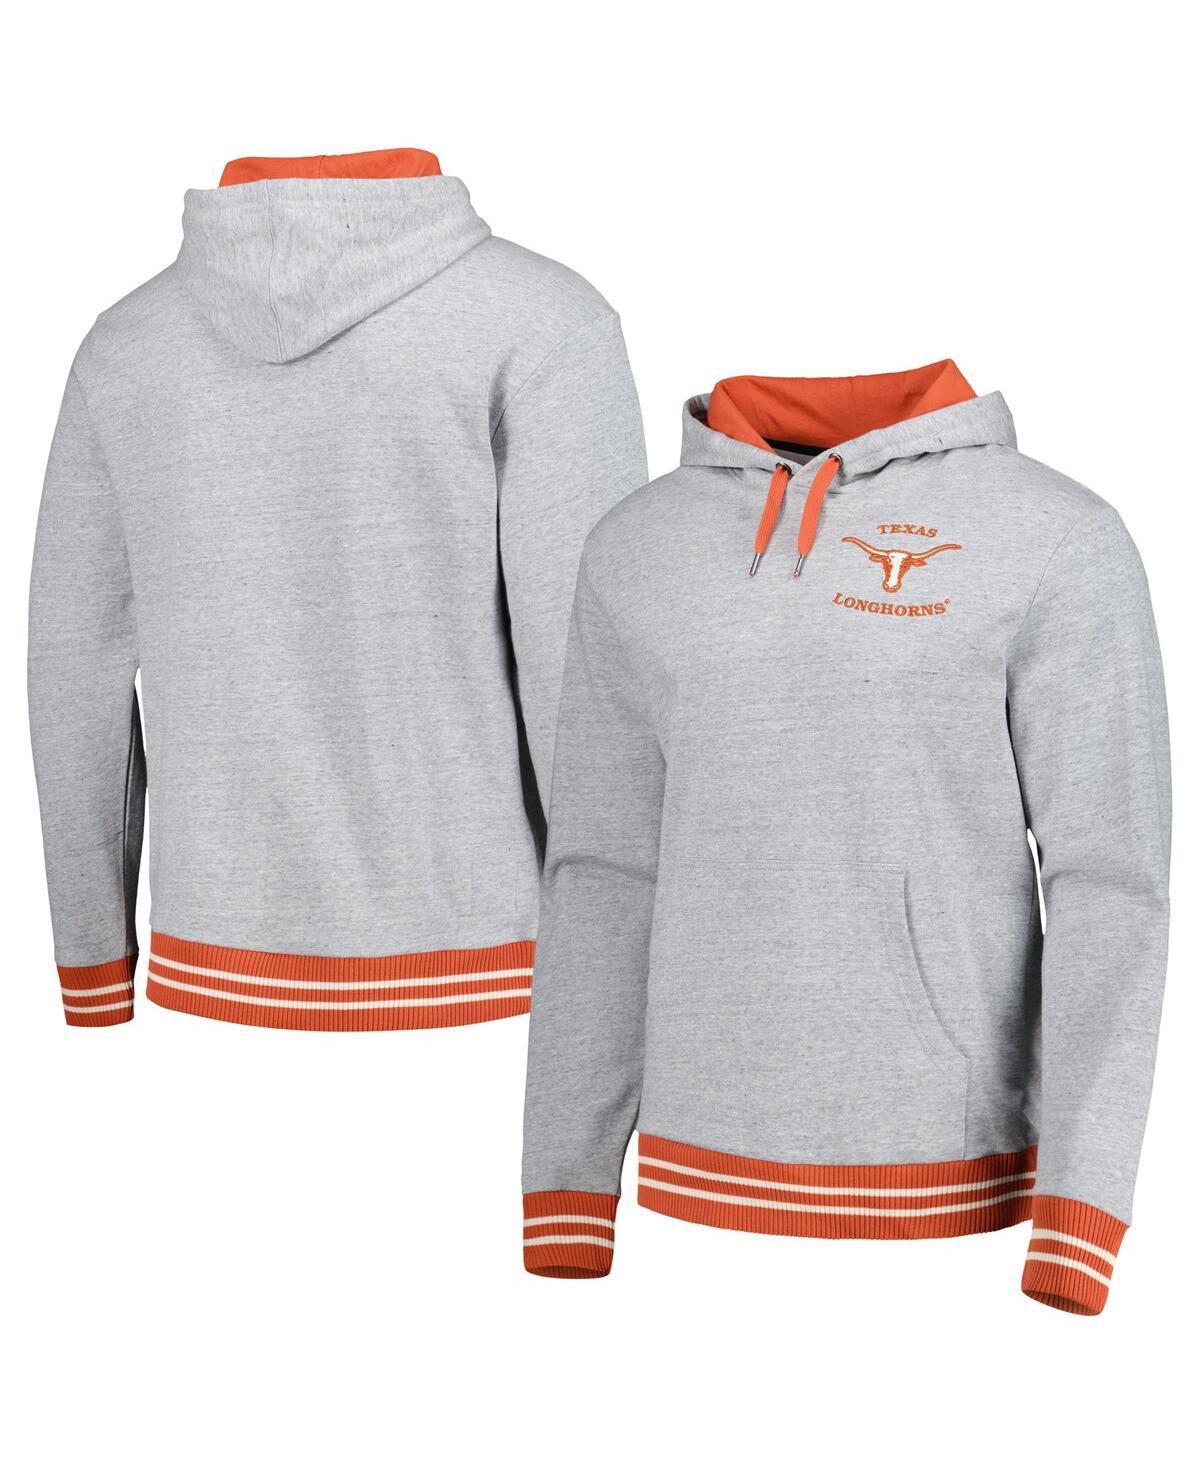 Mitchell & Ness Men's  Heather Gray Texas Longhorns Pullover Hoodie